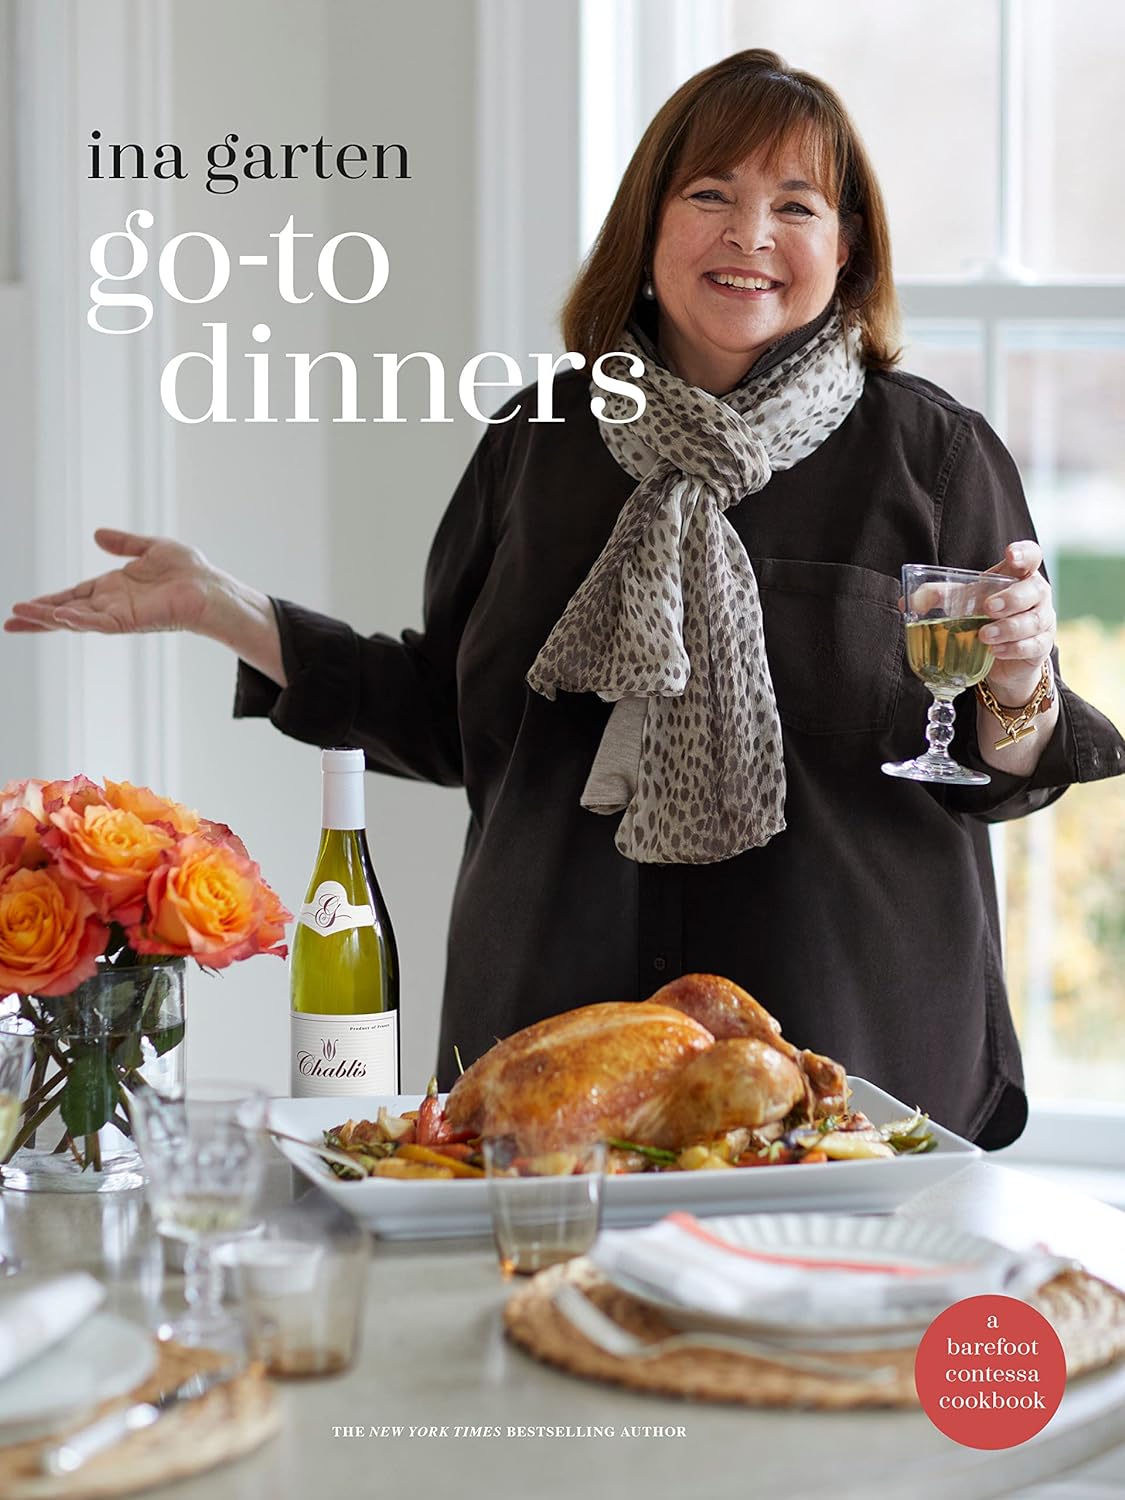 New York Times best selling author, Ina Garten, put together a new cookbook of recipes that are easy to prepare yet still delicious for everyone!